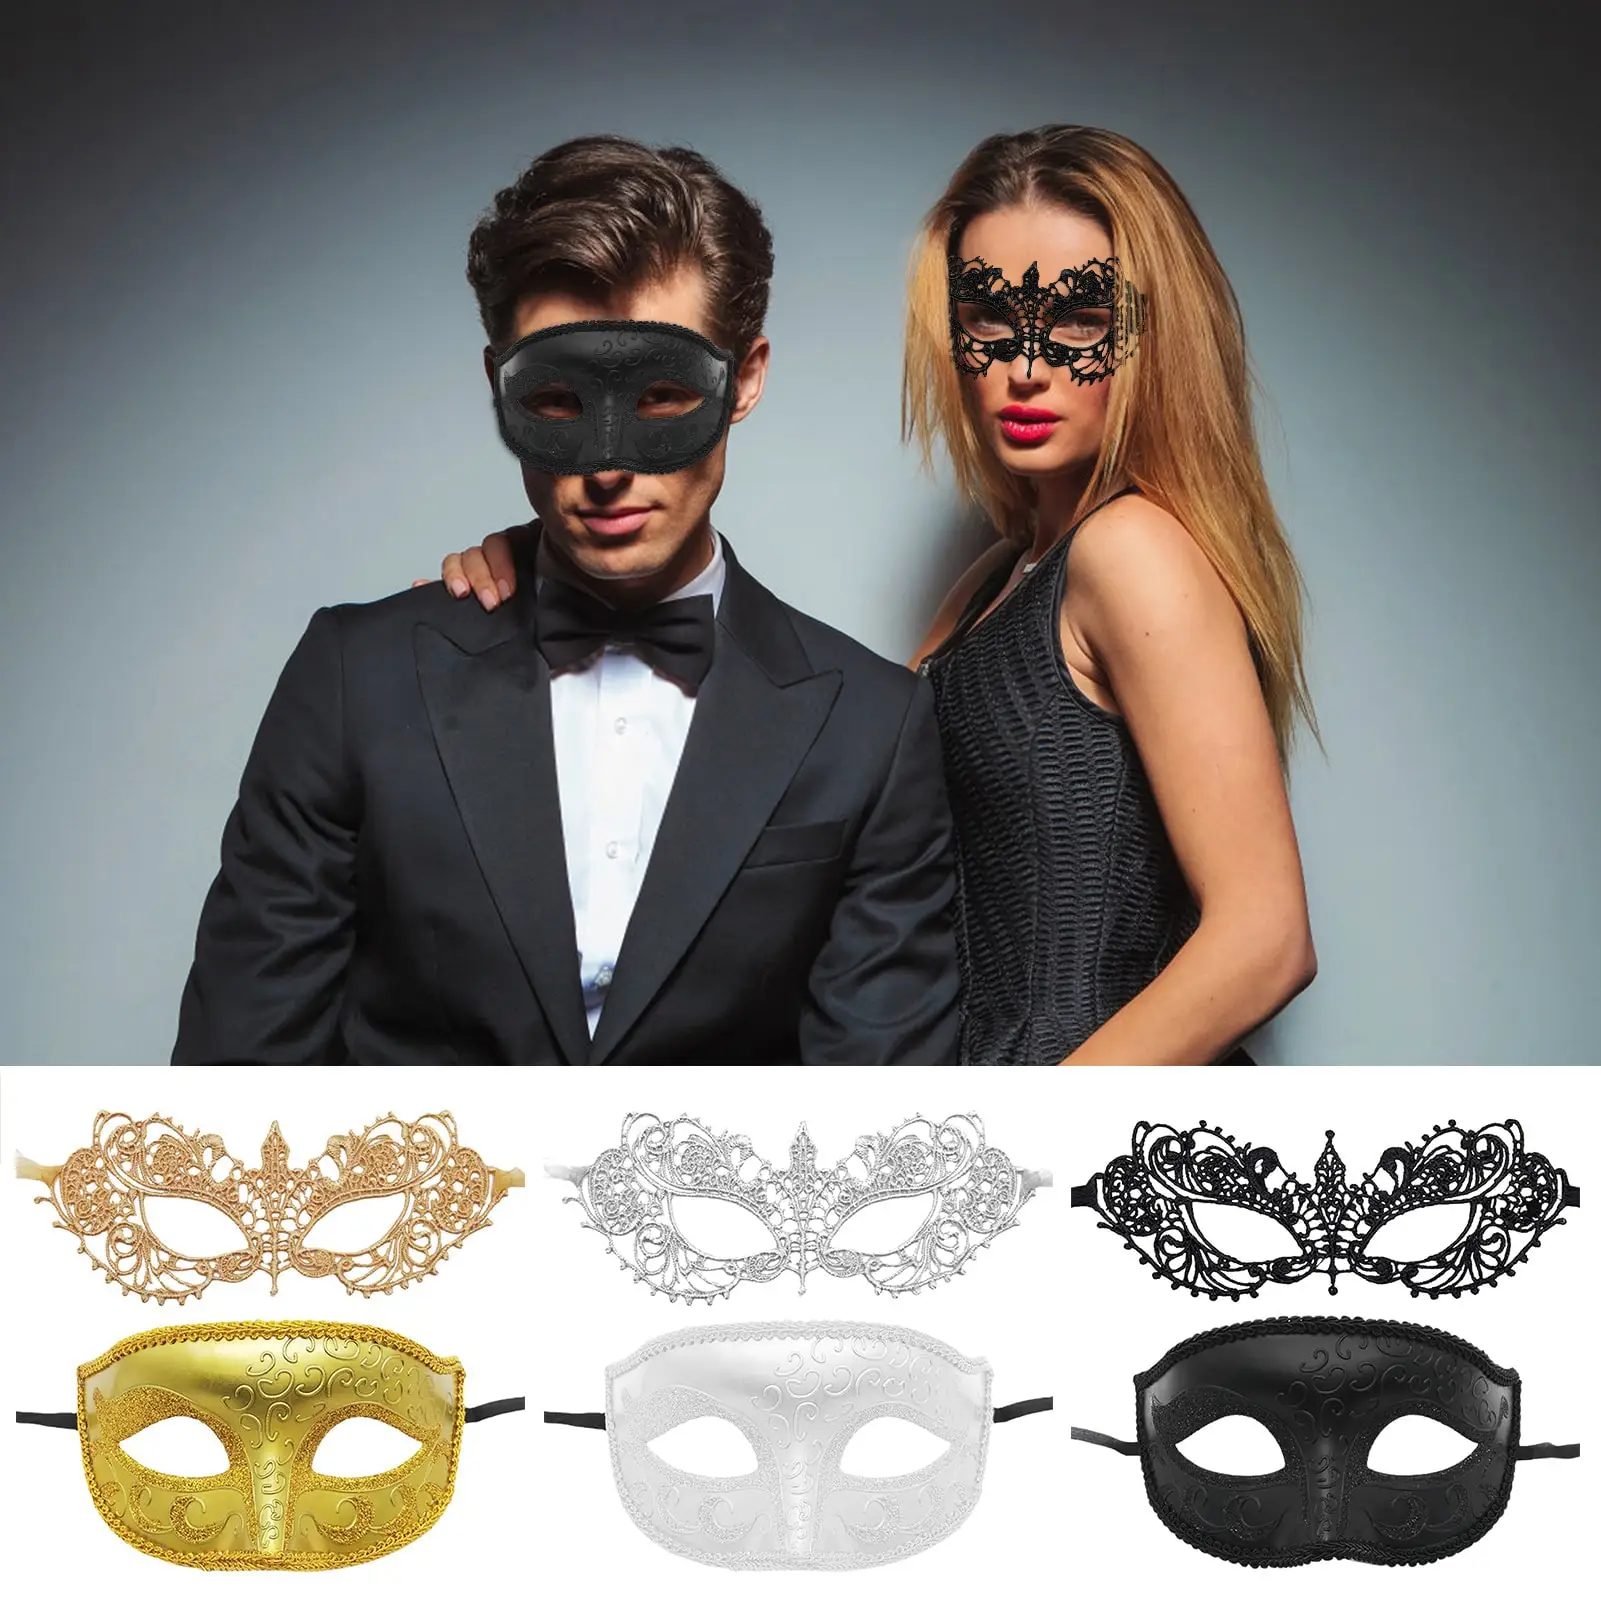 Masquerade Masks for Women - How to Pick the Best Party Mask